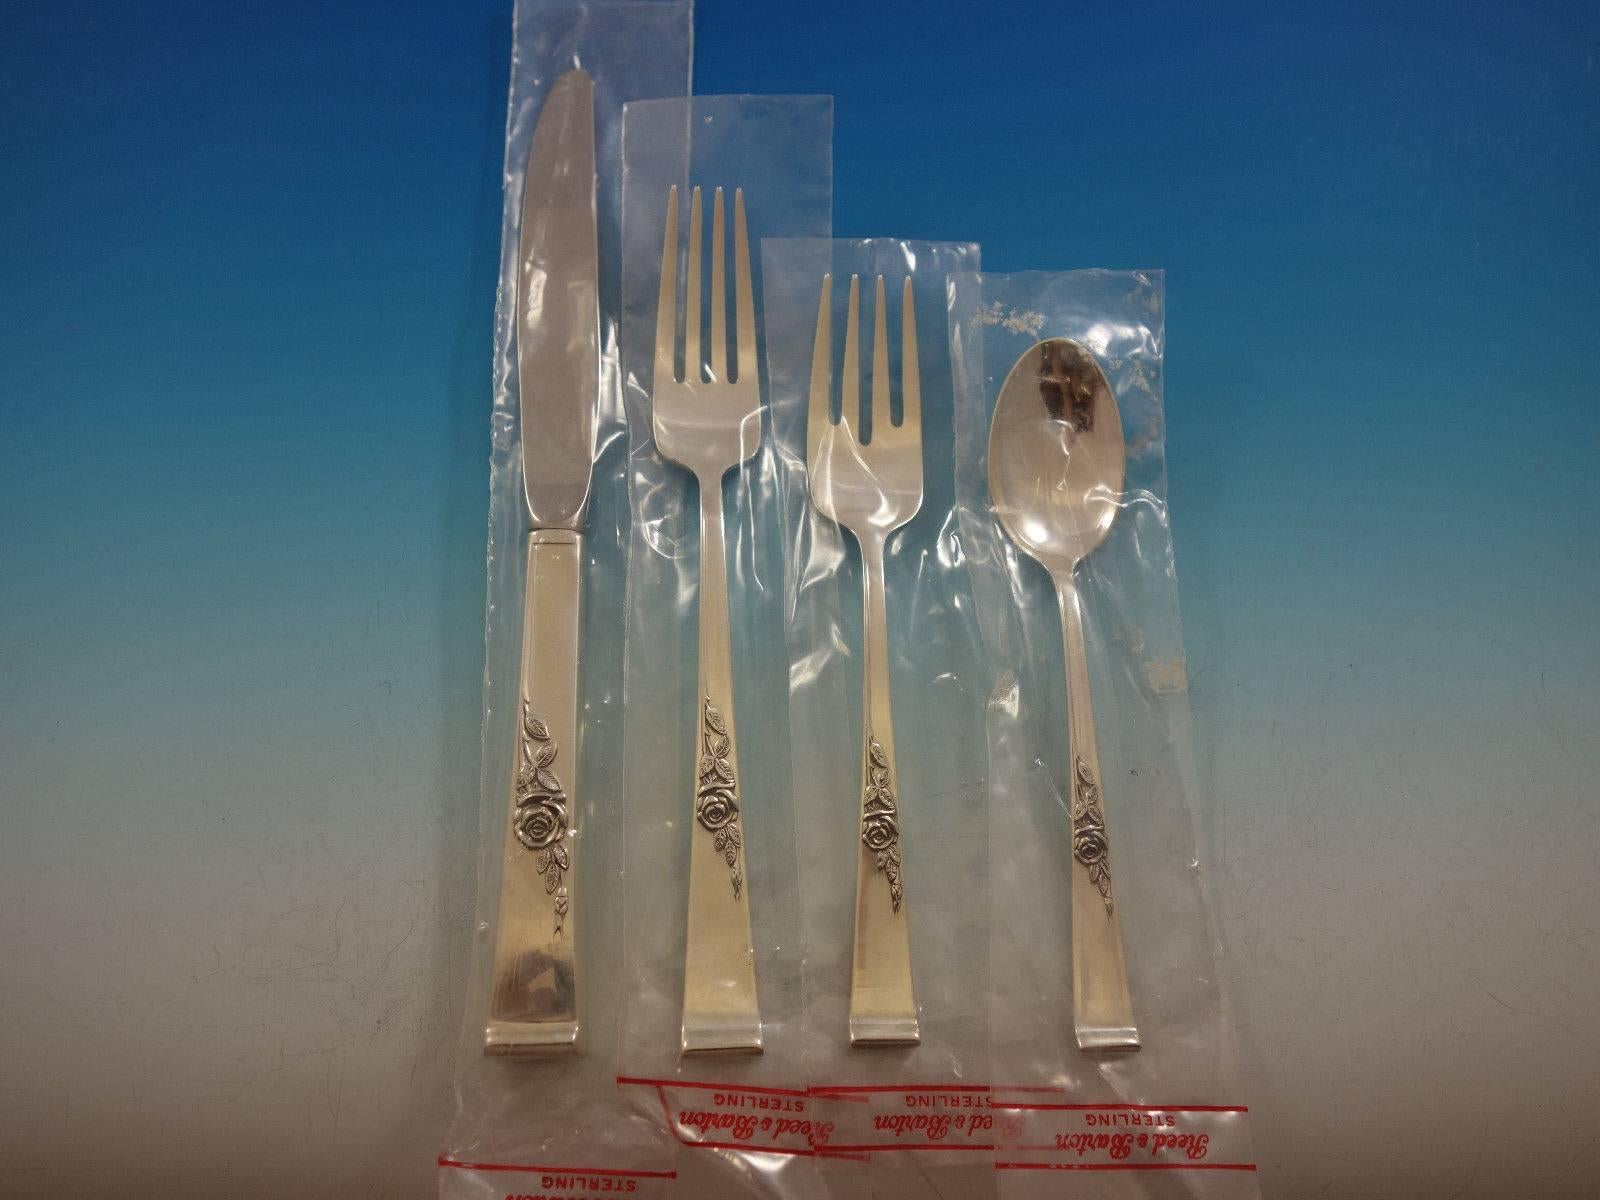 New, unused Classic rose by Reed & Barton sterling silver flatware set, 48 pieces. This set includes: 

12 knives, 9 1/8